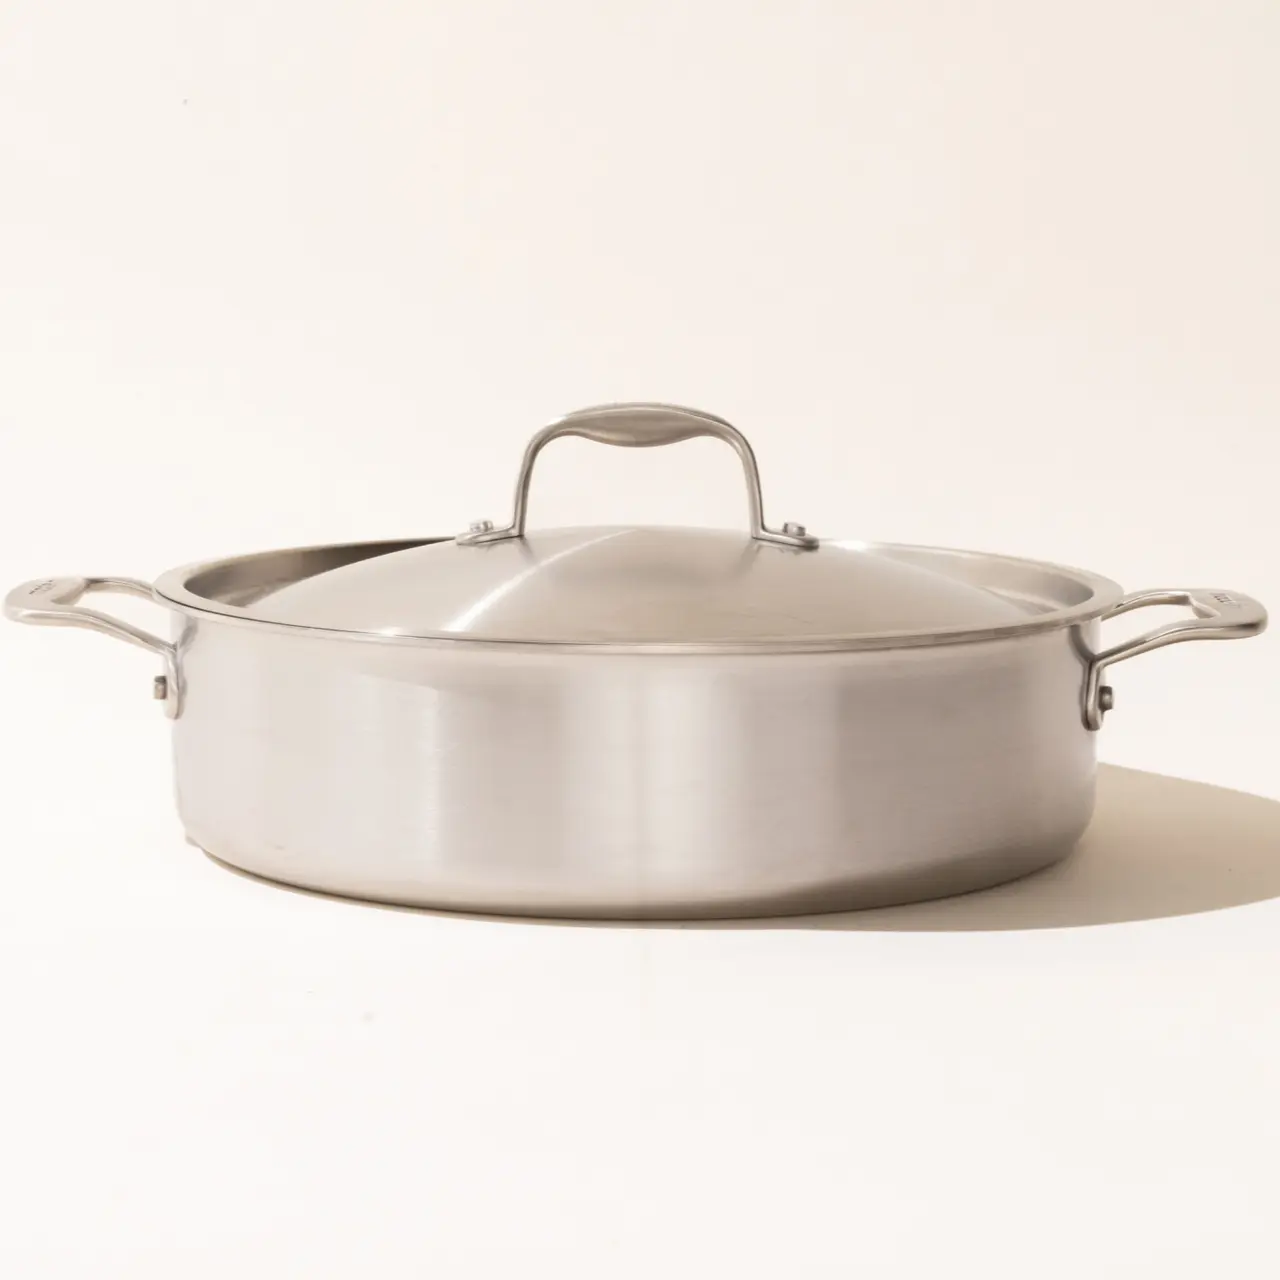 A stainless steel cooking pot with a lid and two handles against a light background.